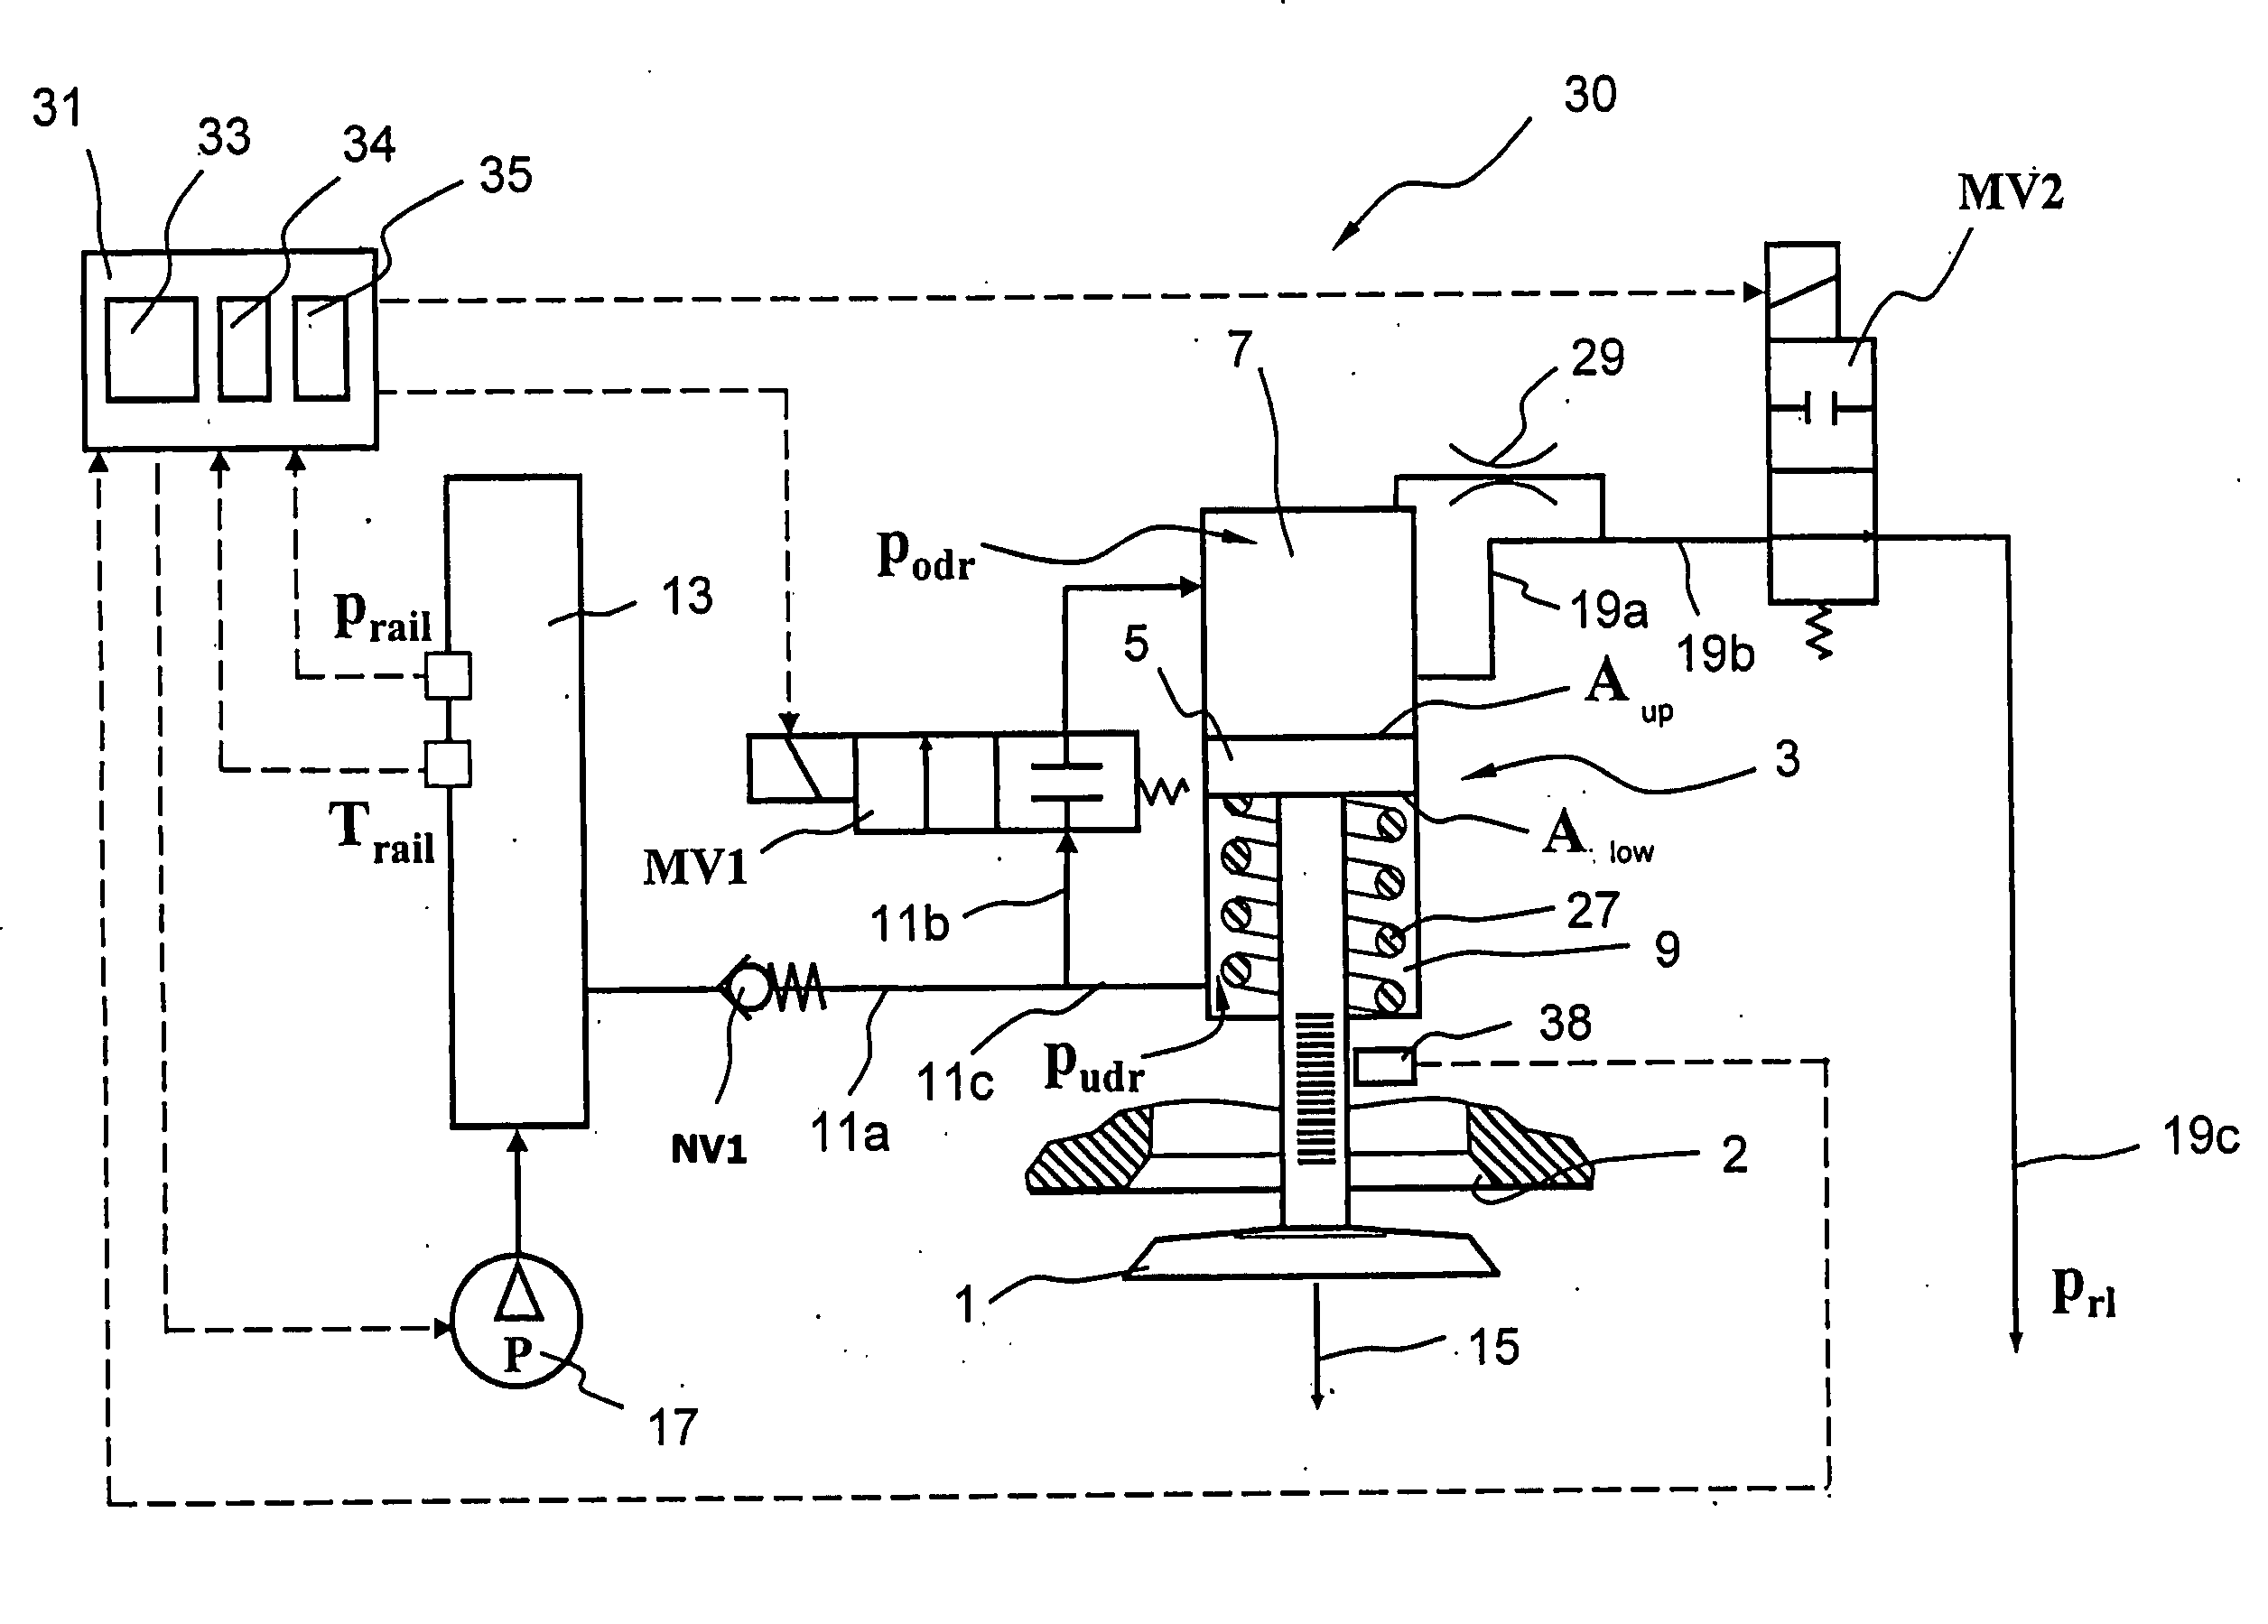 Method and device for controlling a hydraulic actuator